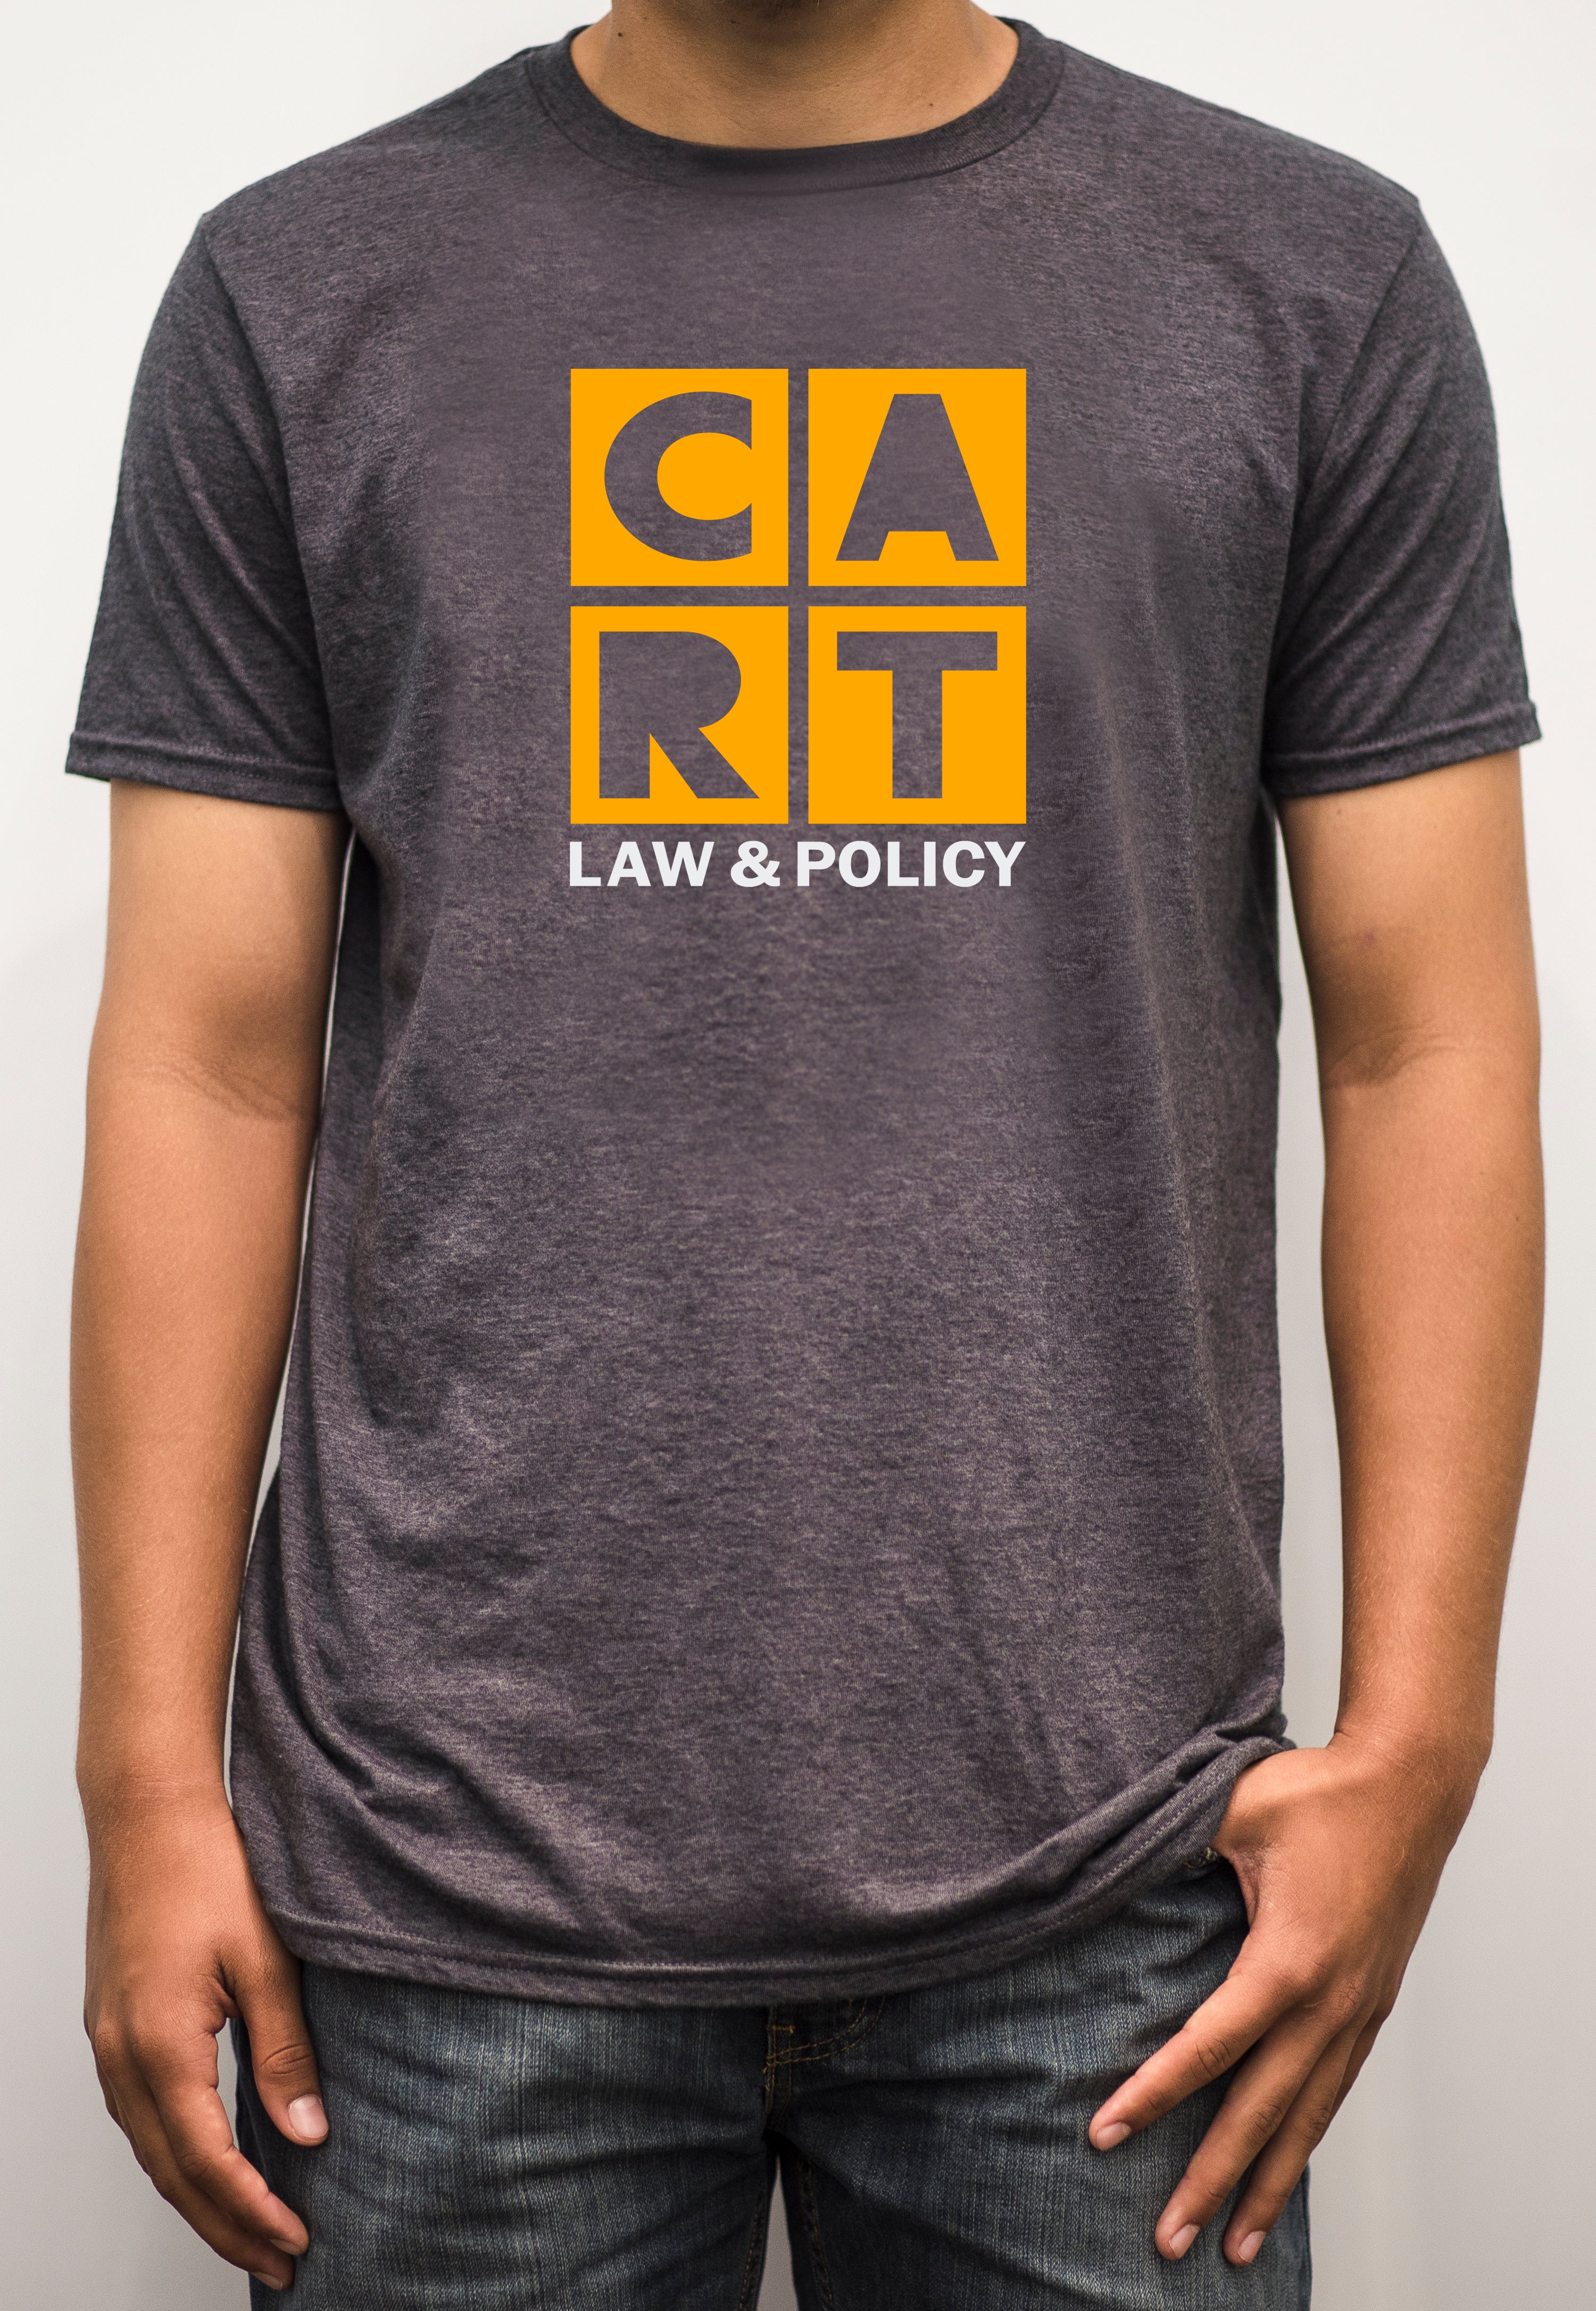 Short sleeve t-shirt - law & policy white/yellow